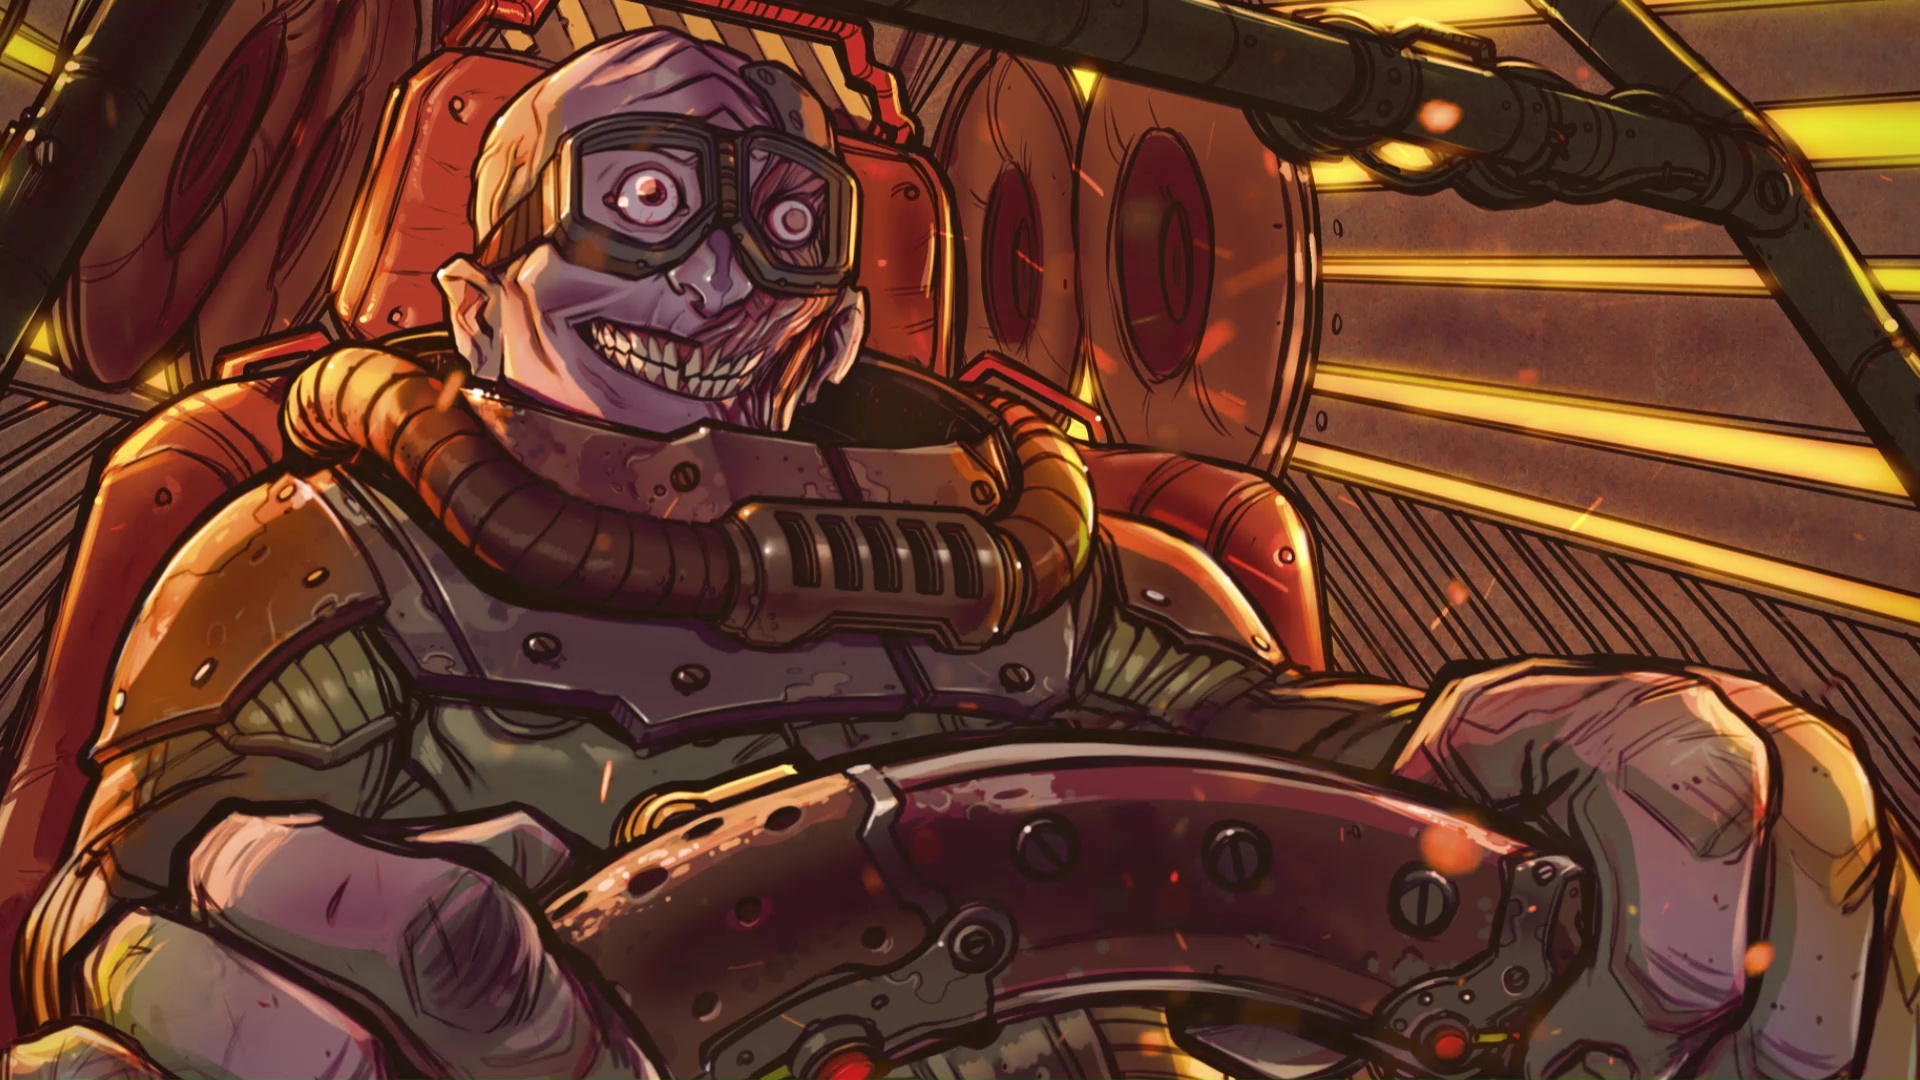 Warhammer 40000 but its in the style of a 1990s Anime  rGrimdank